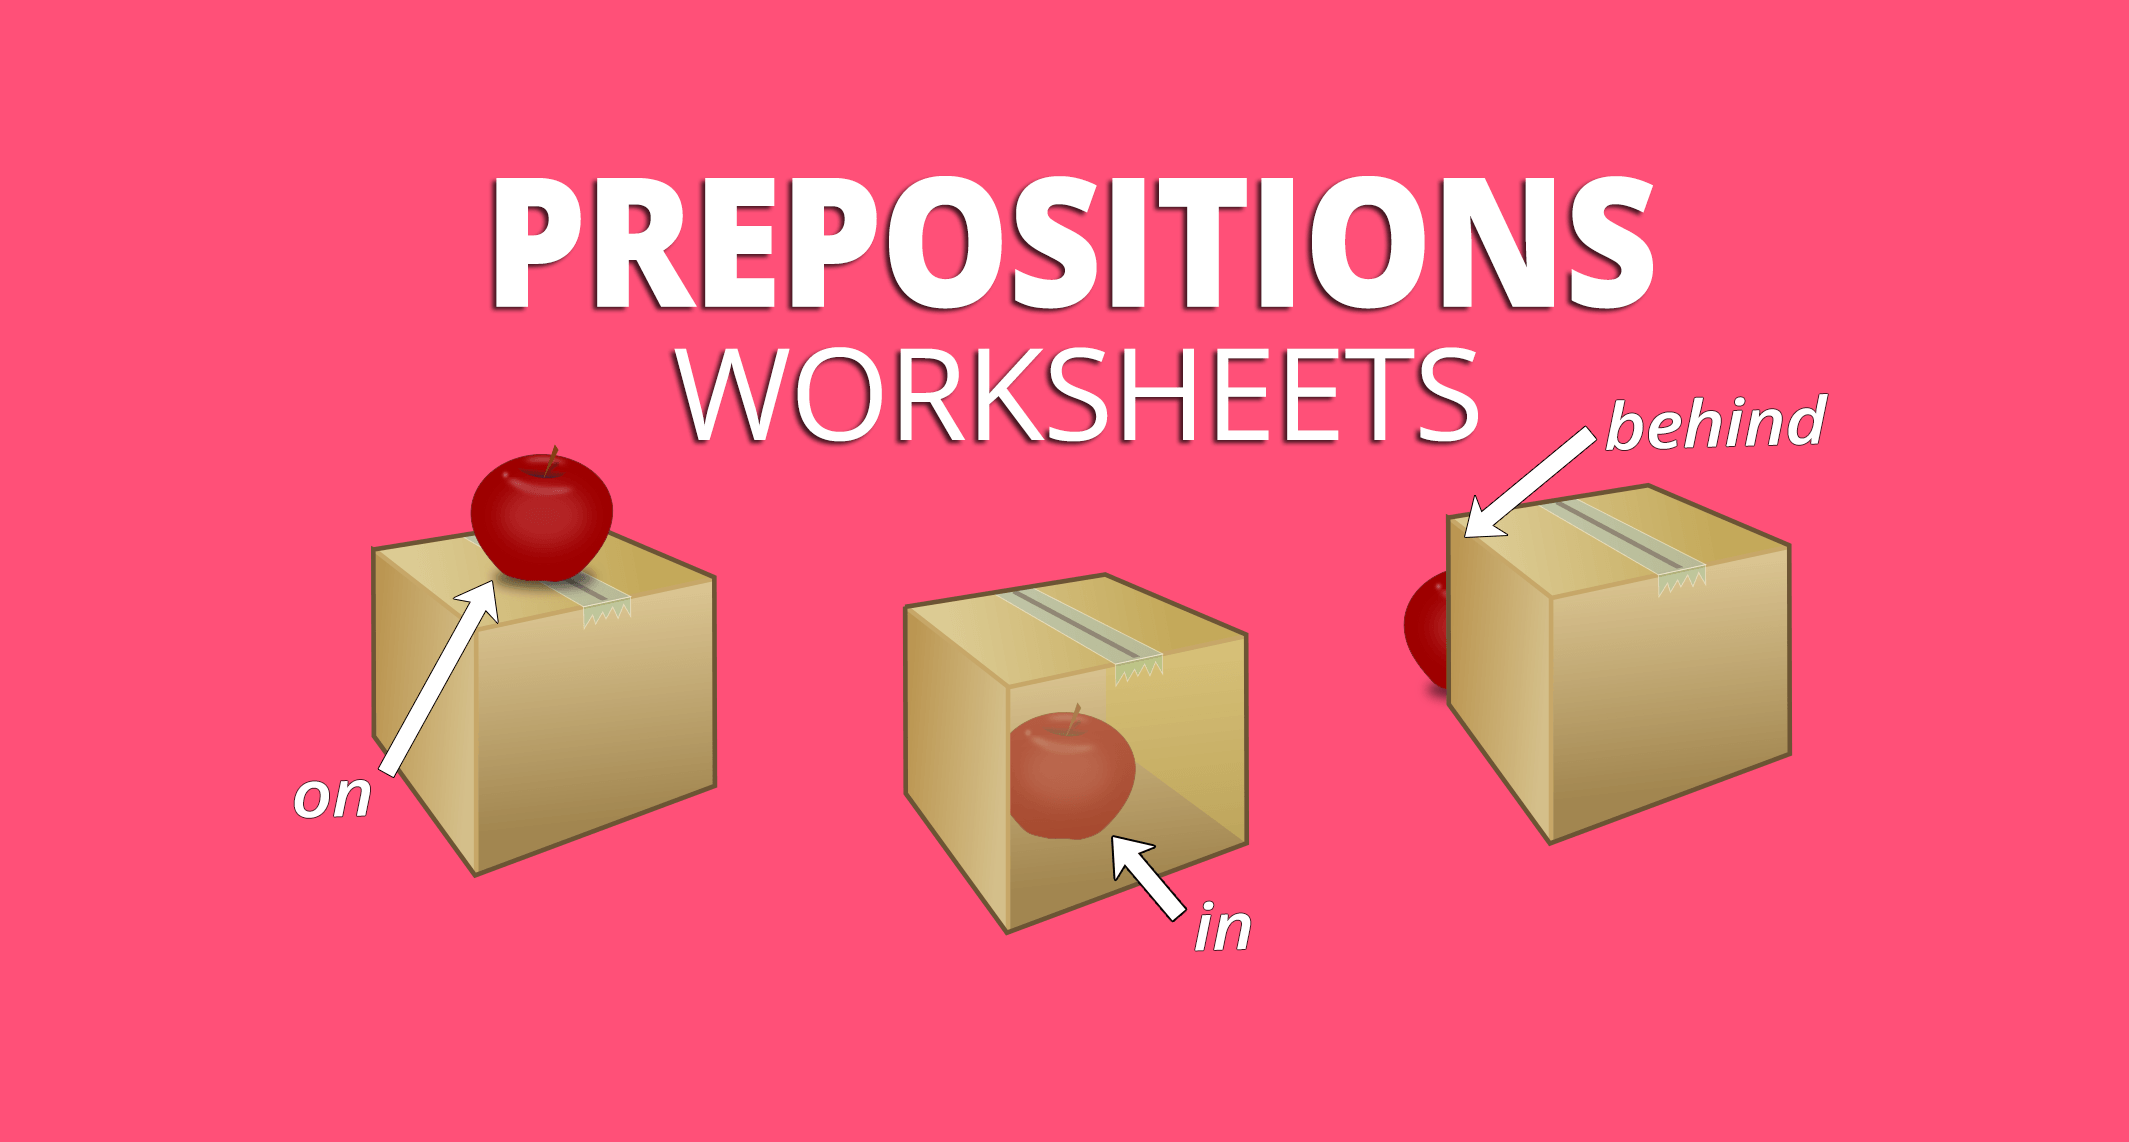 writing-with-prepositions-worksheets-k5-learning-identifying-prepositions-worksheets-k5